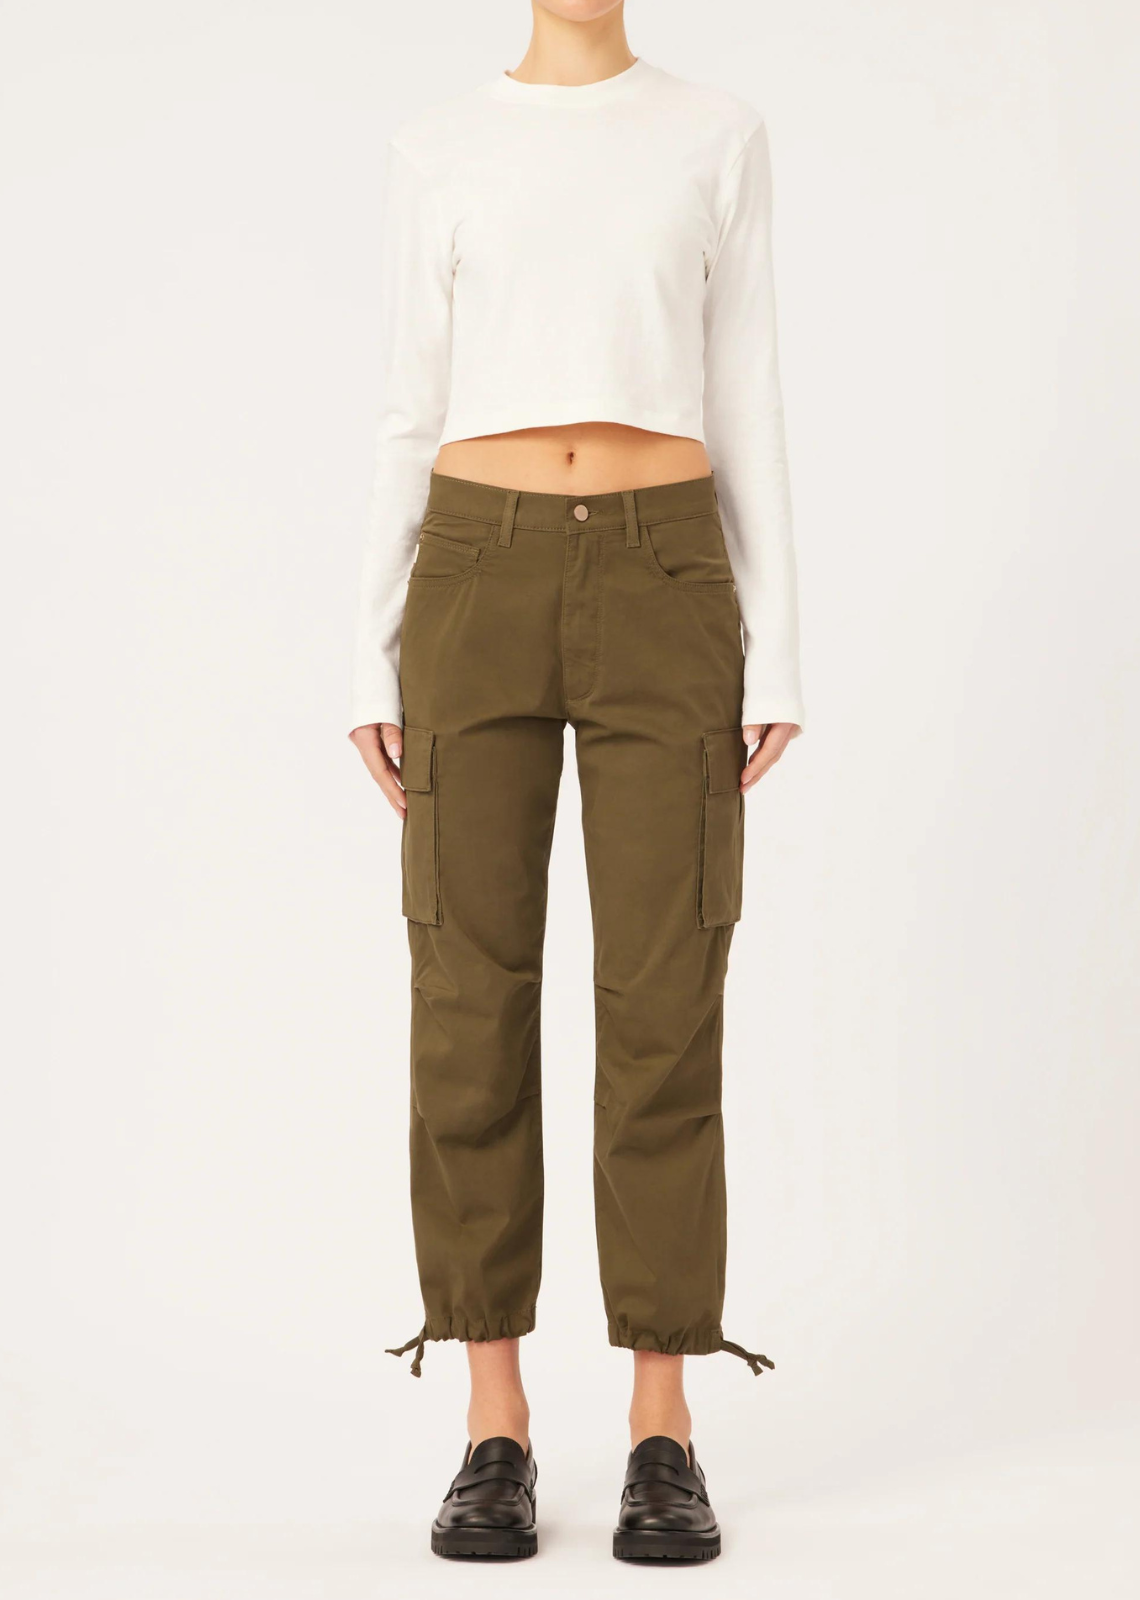 GINA Boho Chic Silk Flared Pants with Pockets in Whimsical (one size) -  Indie Ella Lifestyle